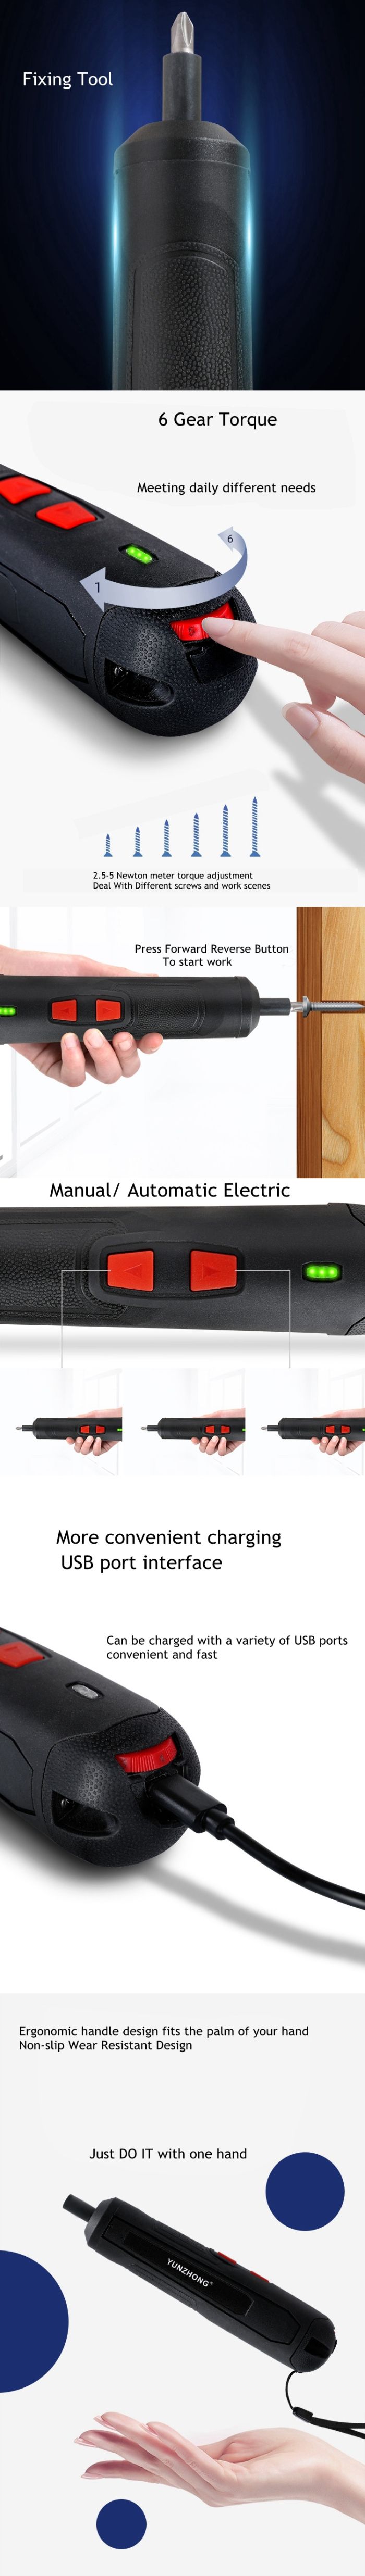 YUNZHONG-18-In-1-Electric-Screwdriver-Micro-Li-ion-Battery-USB-Screw-Driver-for-Multi-used-Daily-DIY-1595130